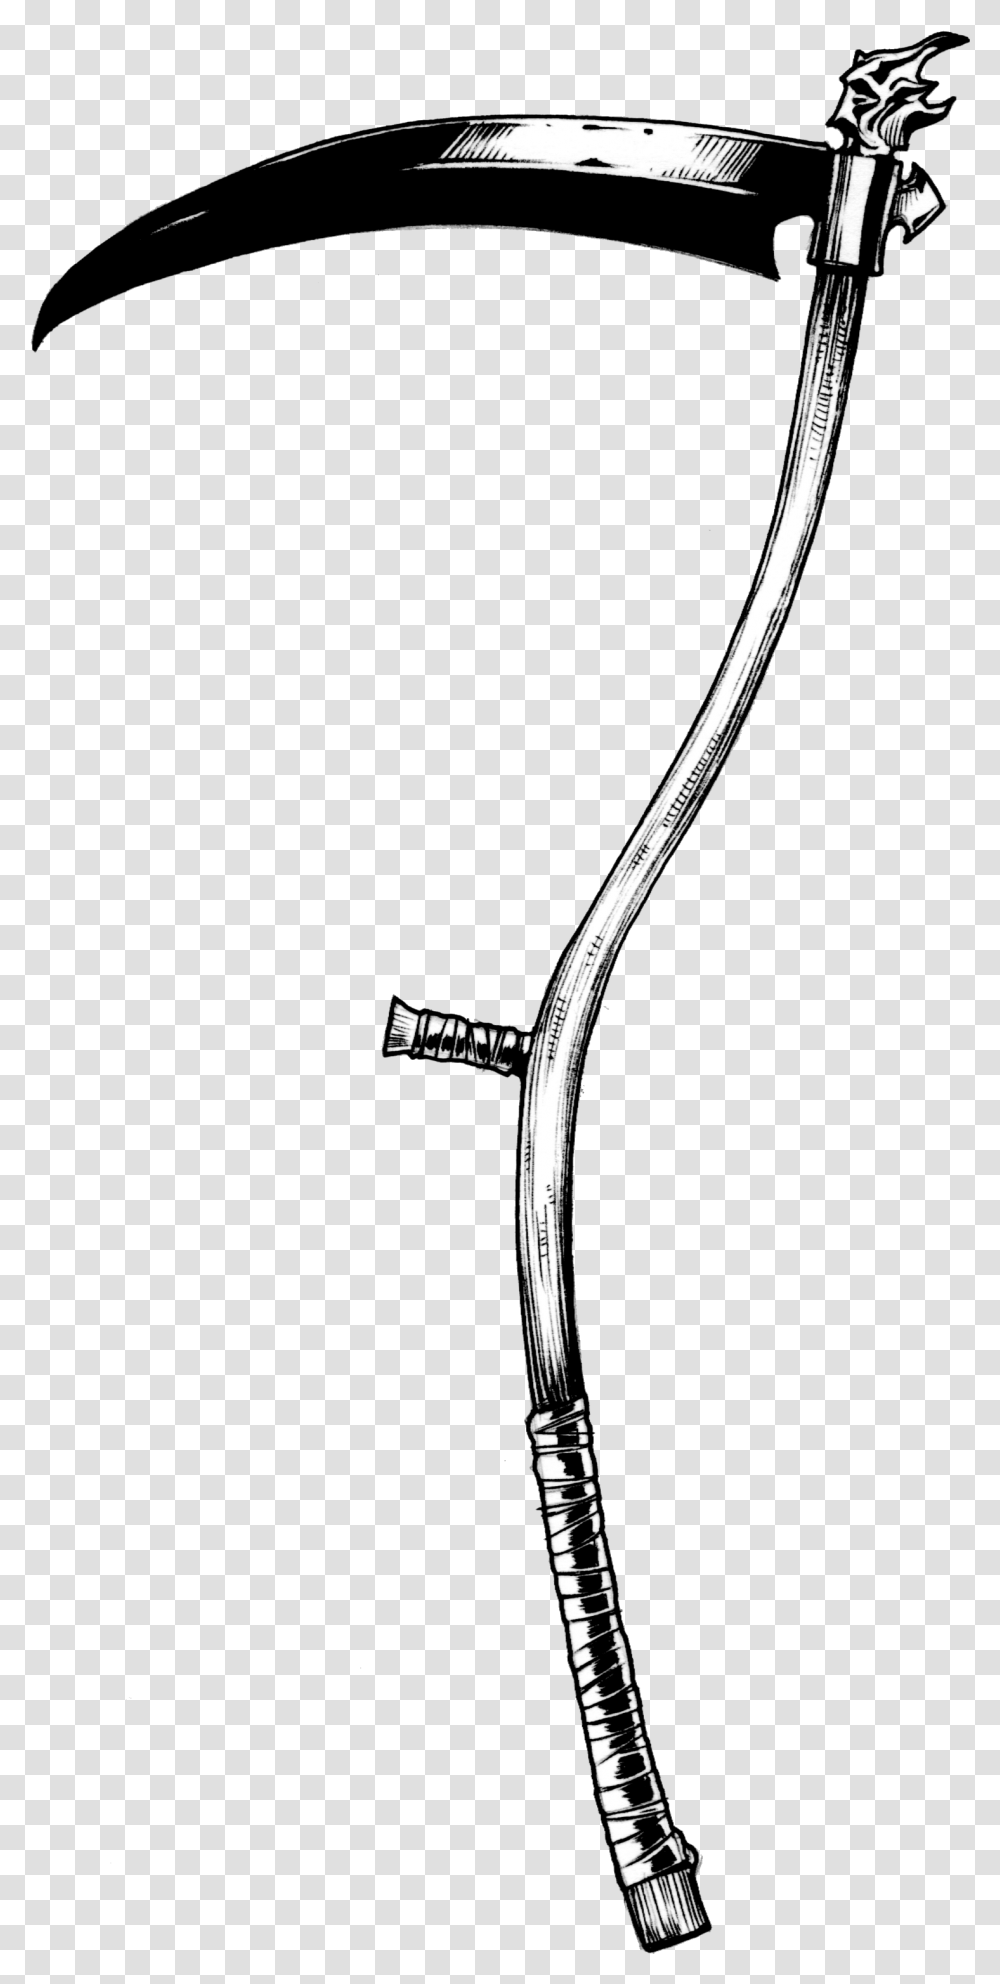 Drawn Scythe Crazy Reaper Sickle, Sword, Blade, Weapon, Weaponry Transparent Png